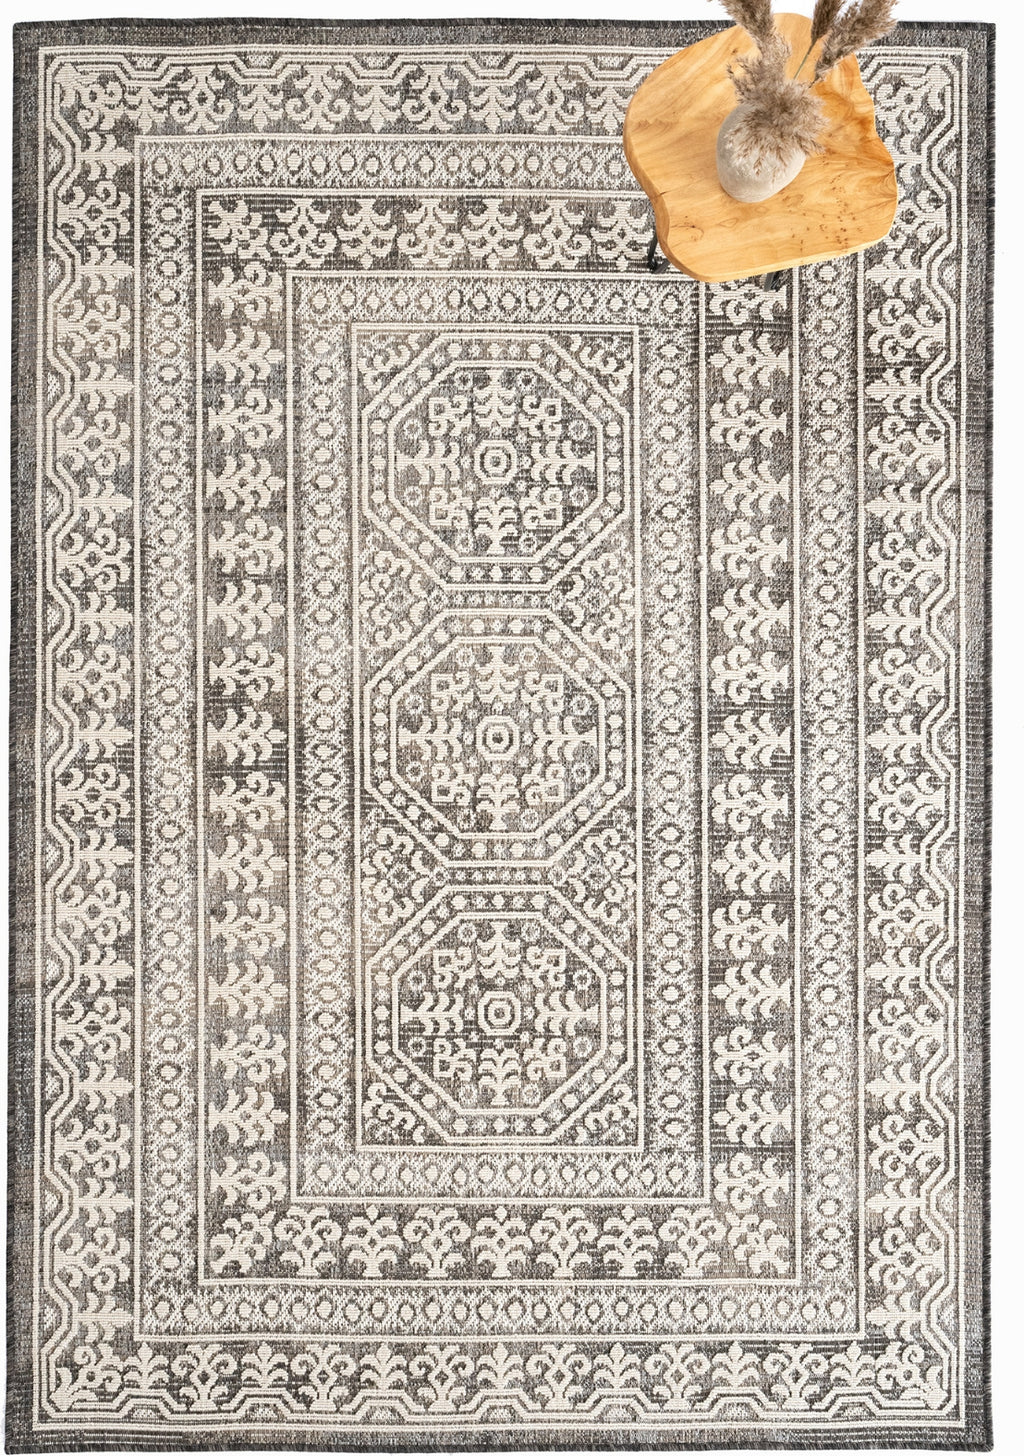 Capel Sunset-Haven 5120 Fawn 730 Area Rug Rectangle Roomshot Image 1 Feature